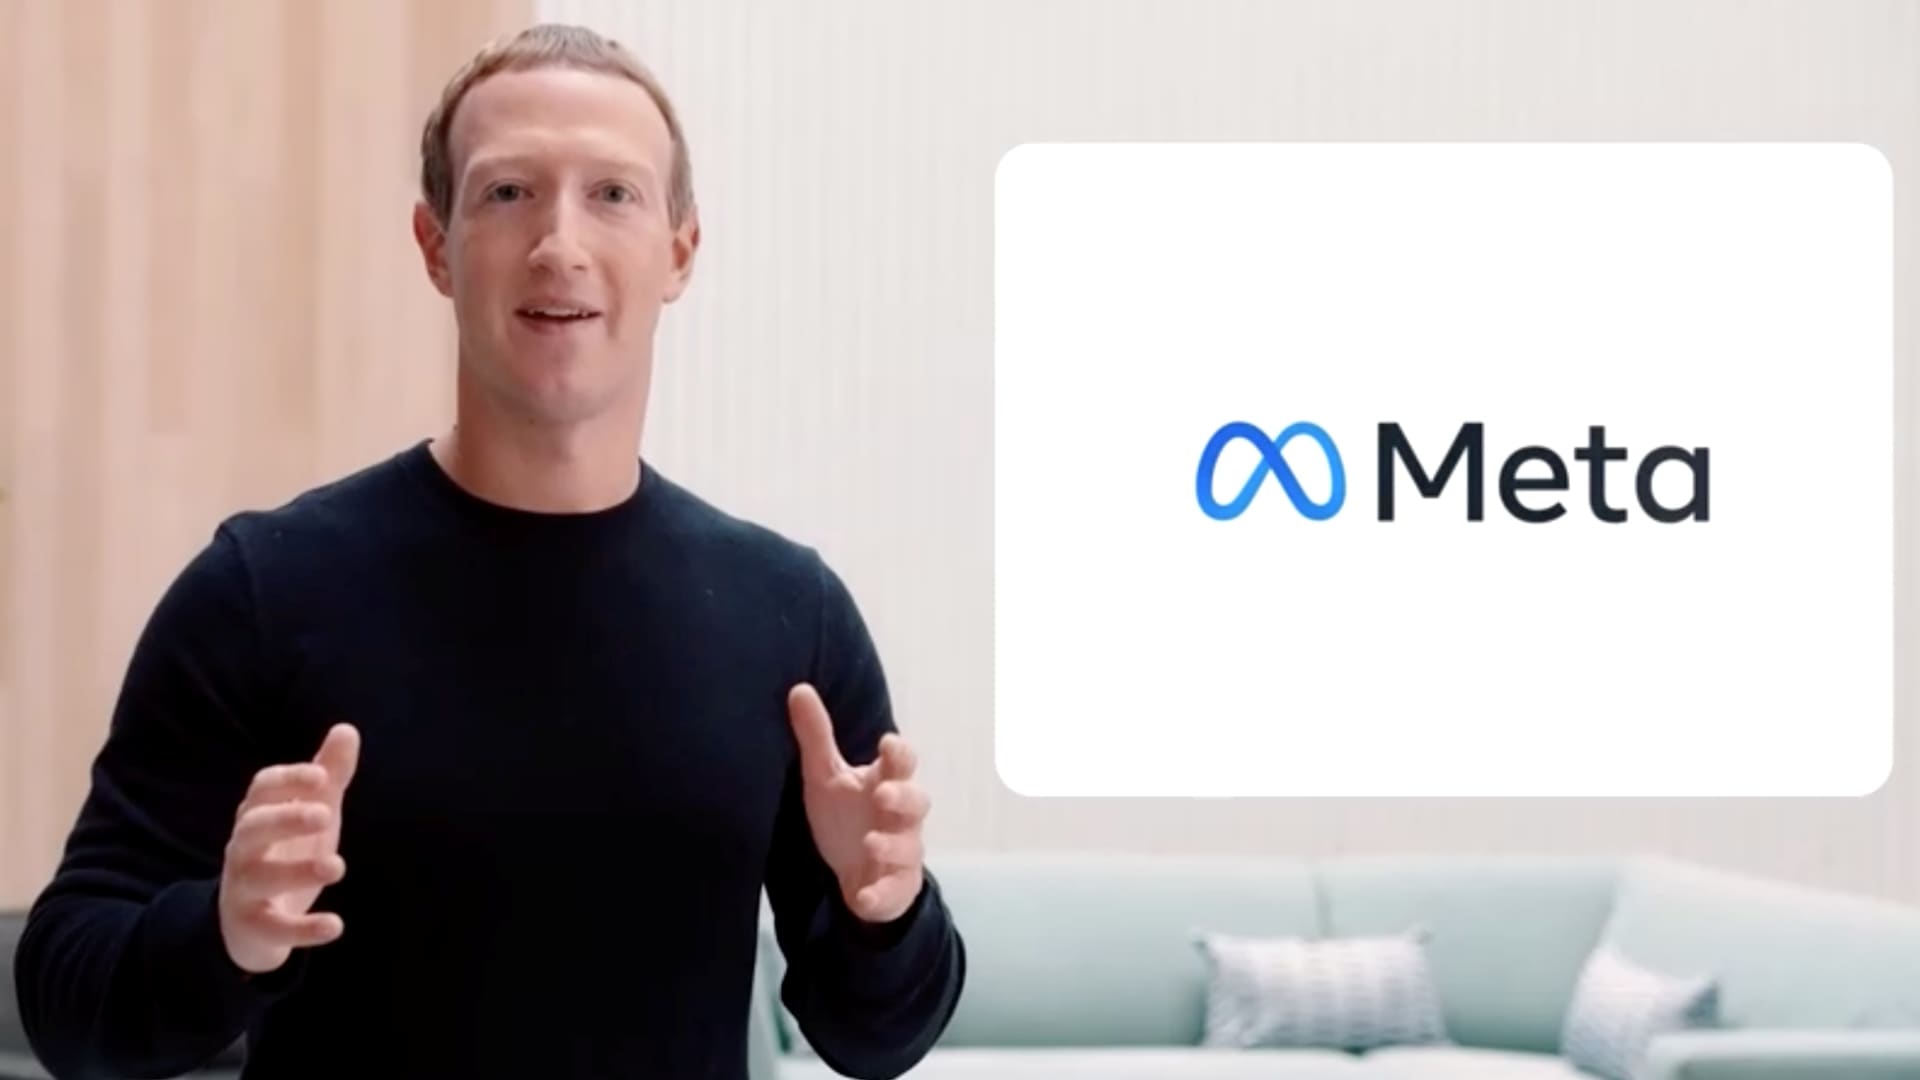 Facebook CEO Mark Zuckerberg speaks during a live-streamed virtual and augmented reality conference to announce the rebrand of Facebook as Meta, in this screen grab taken from a video released October 28, 2021.